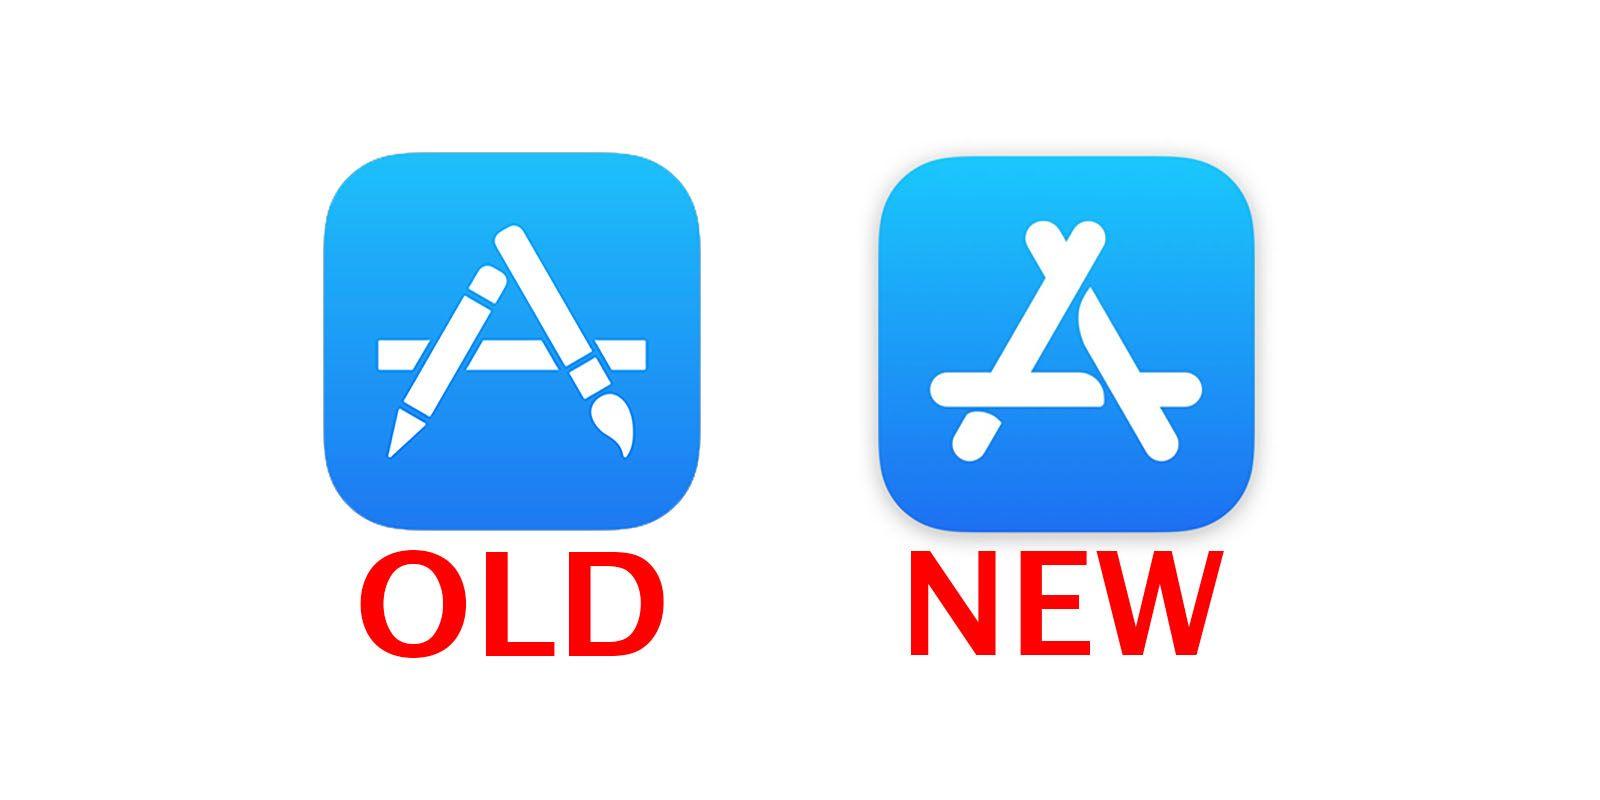 Apple App Logo - Apple just changed the App Store icon for the first time in years